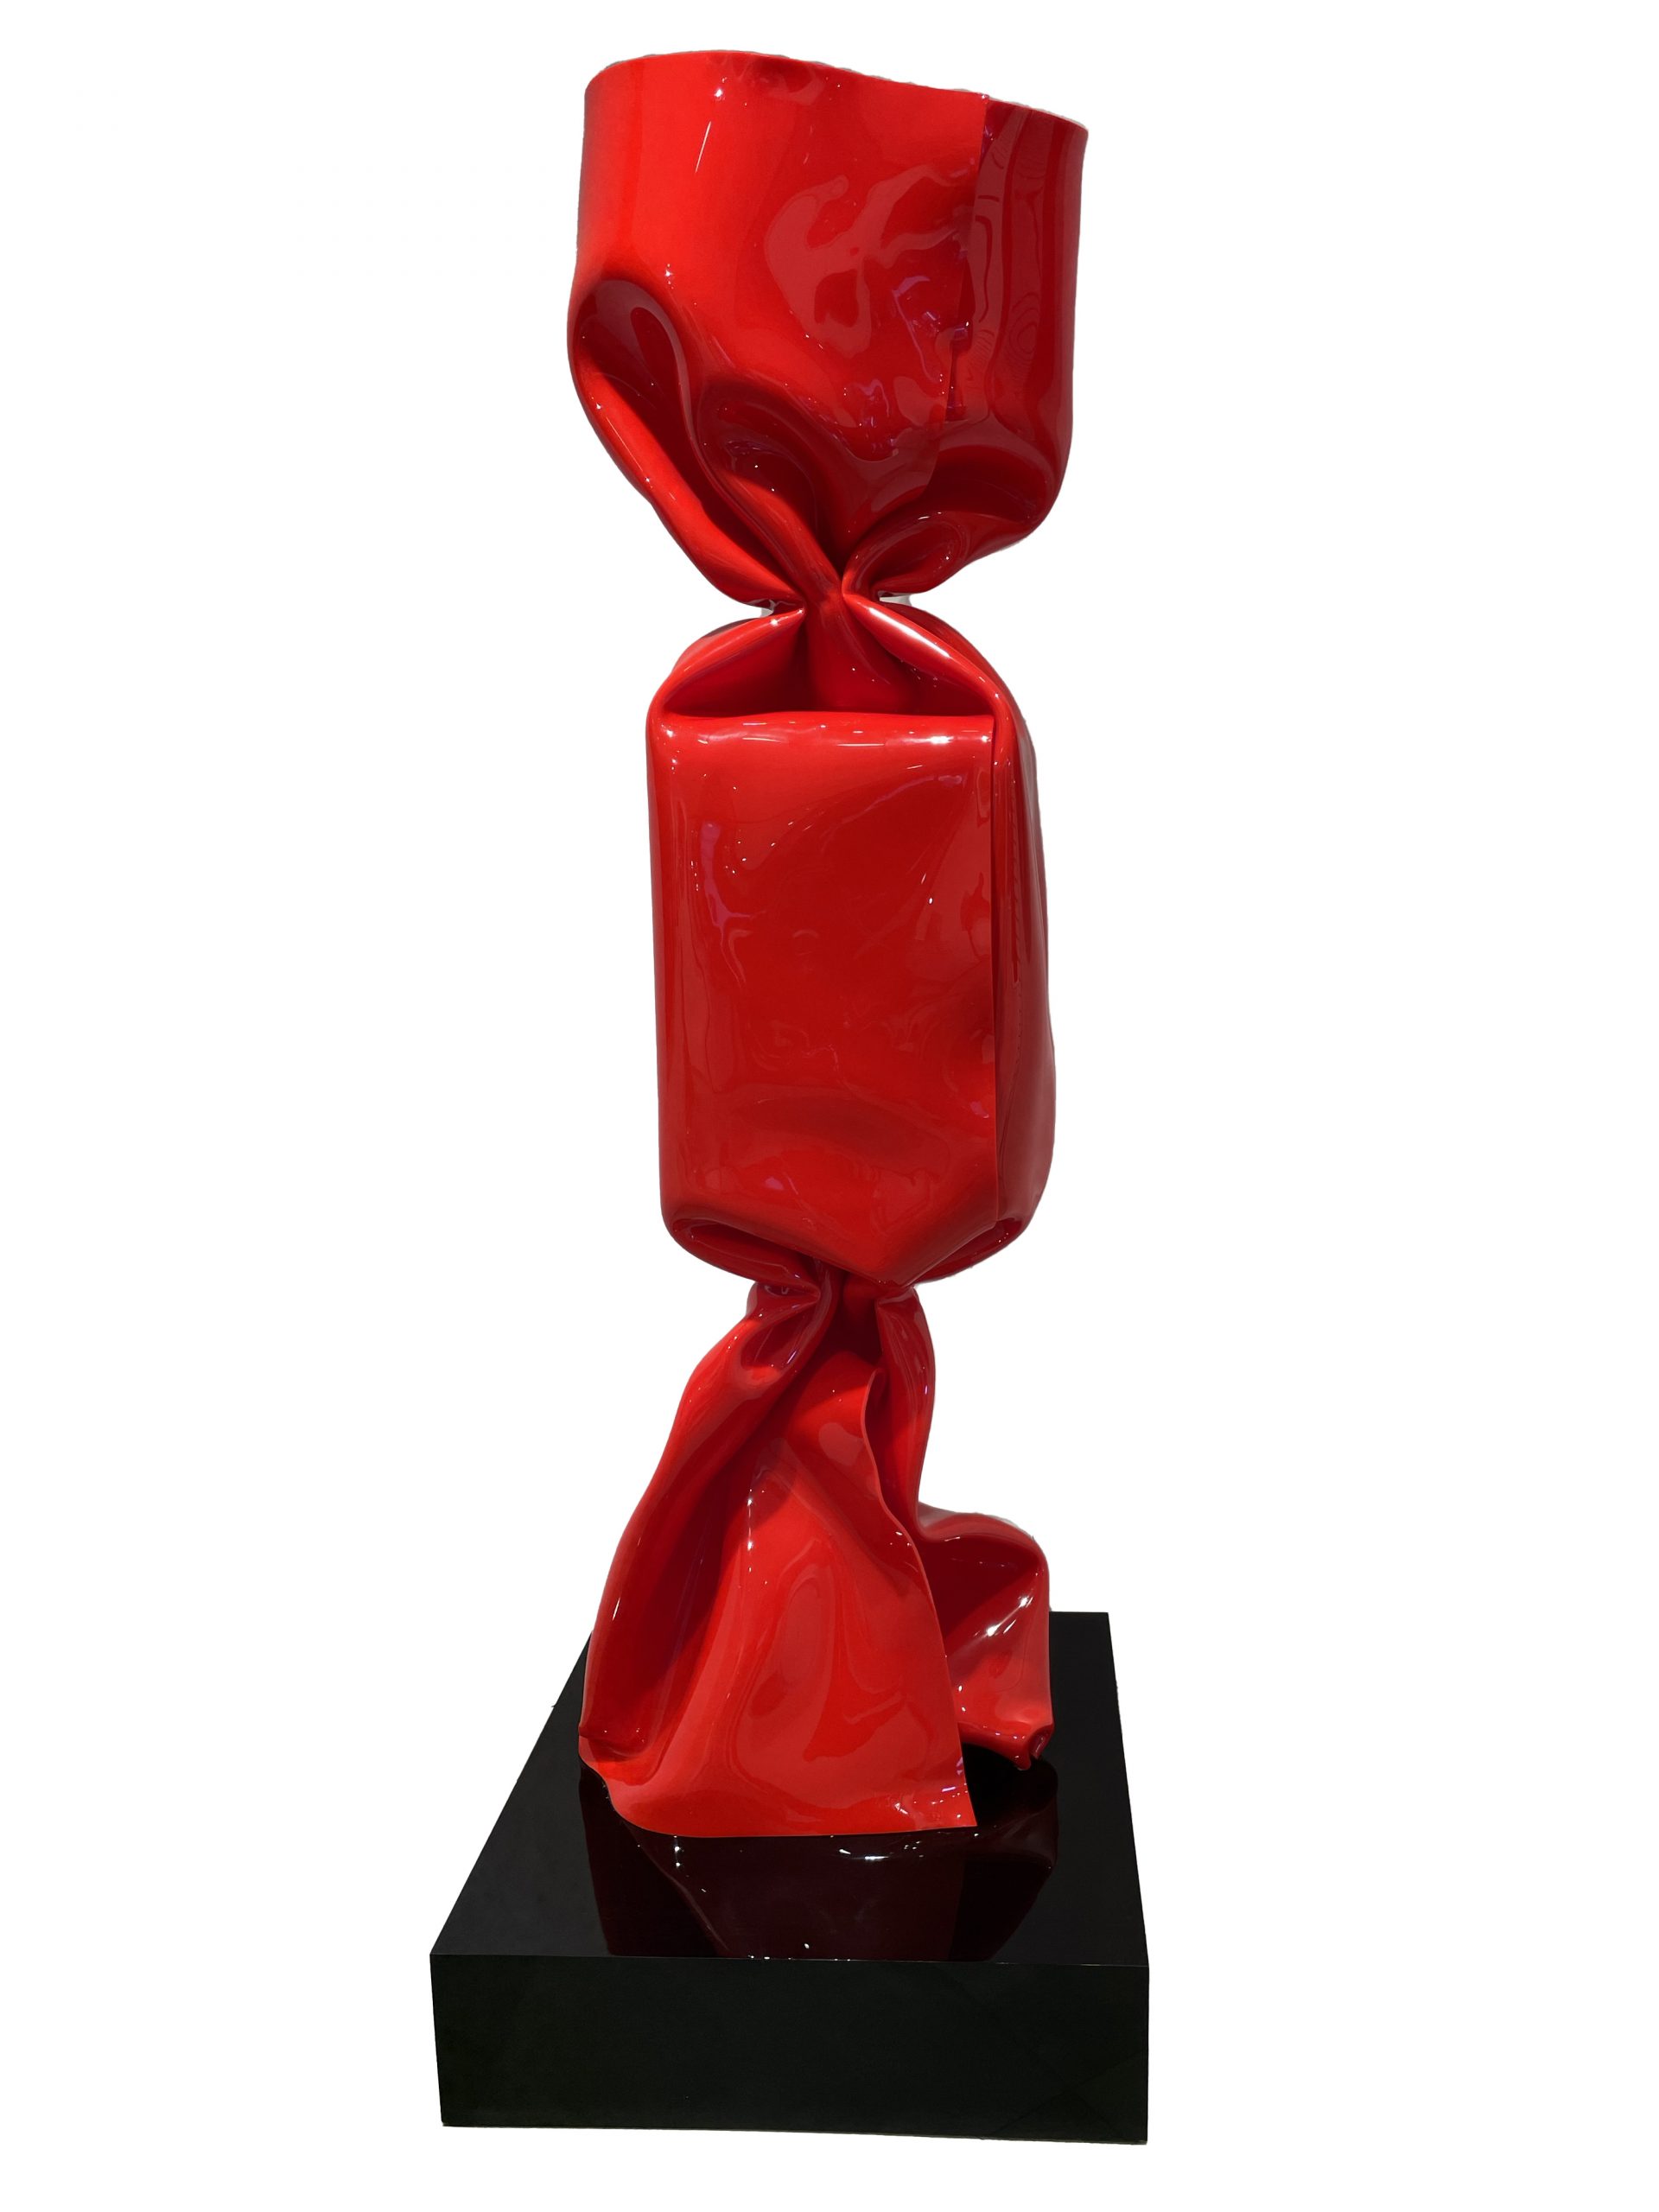 Laurence Jenk Artiste<br />
Wrapping Bonbon Monumental Rouge<br />
© Marciano Contemporary